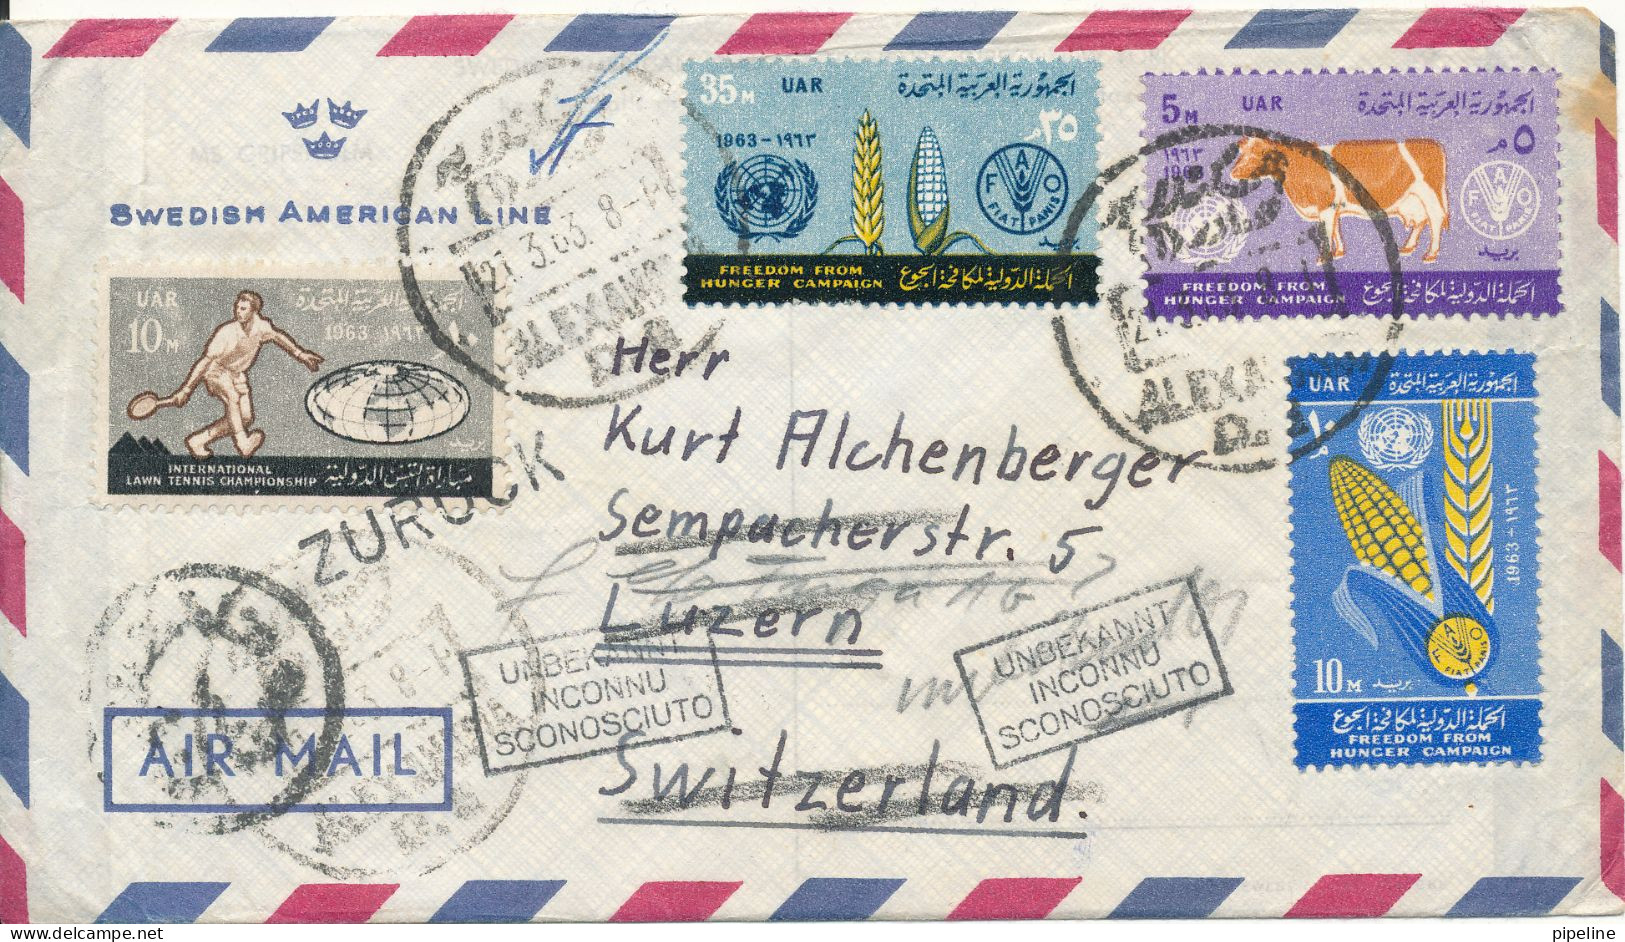 UAR Egypt Air Mail Cover Sent To Switzerland 21-3-1963 And Returned Because Of Unknown Address (Swedish American Line) - Posta Aerea